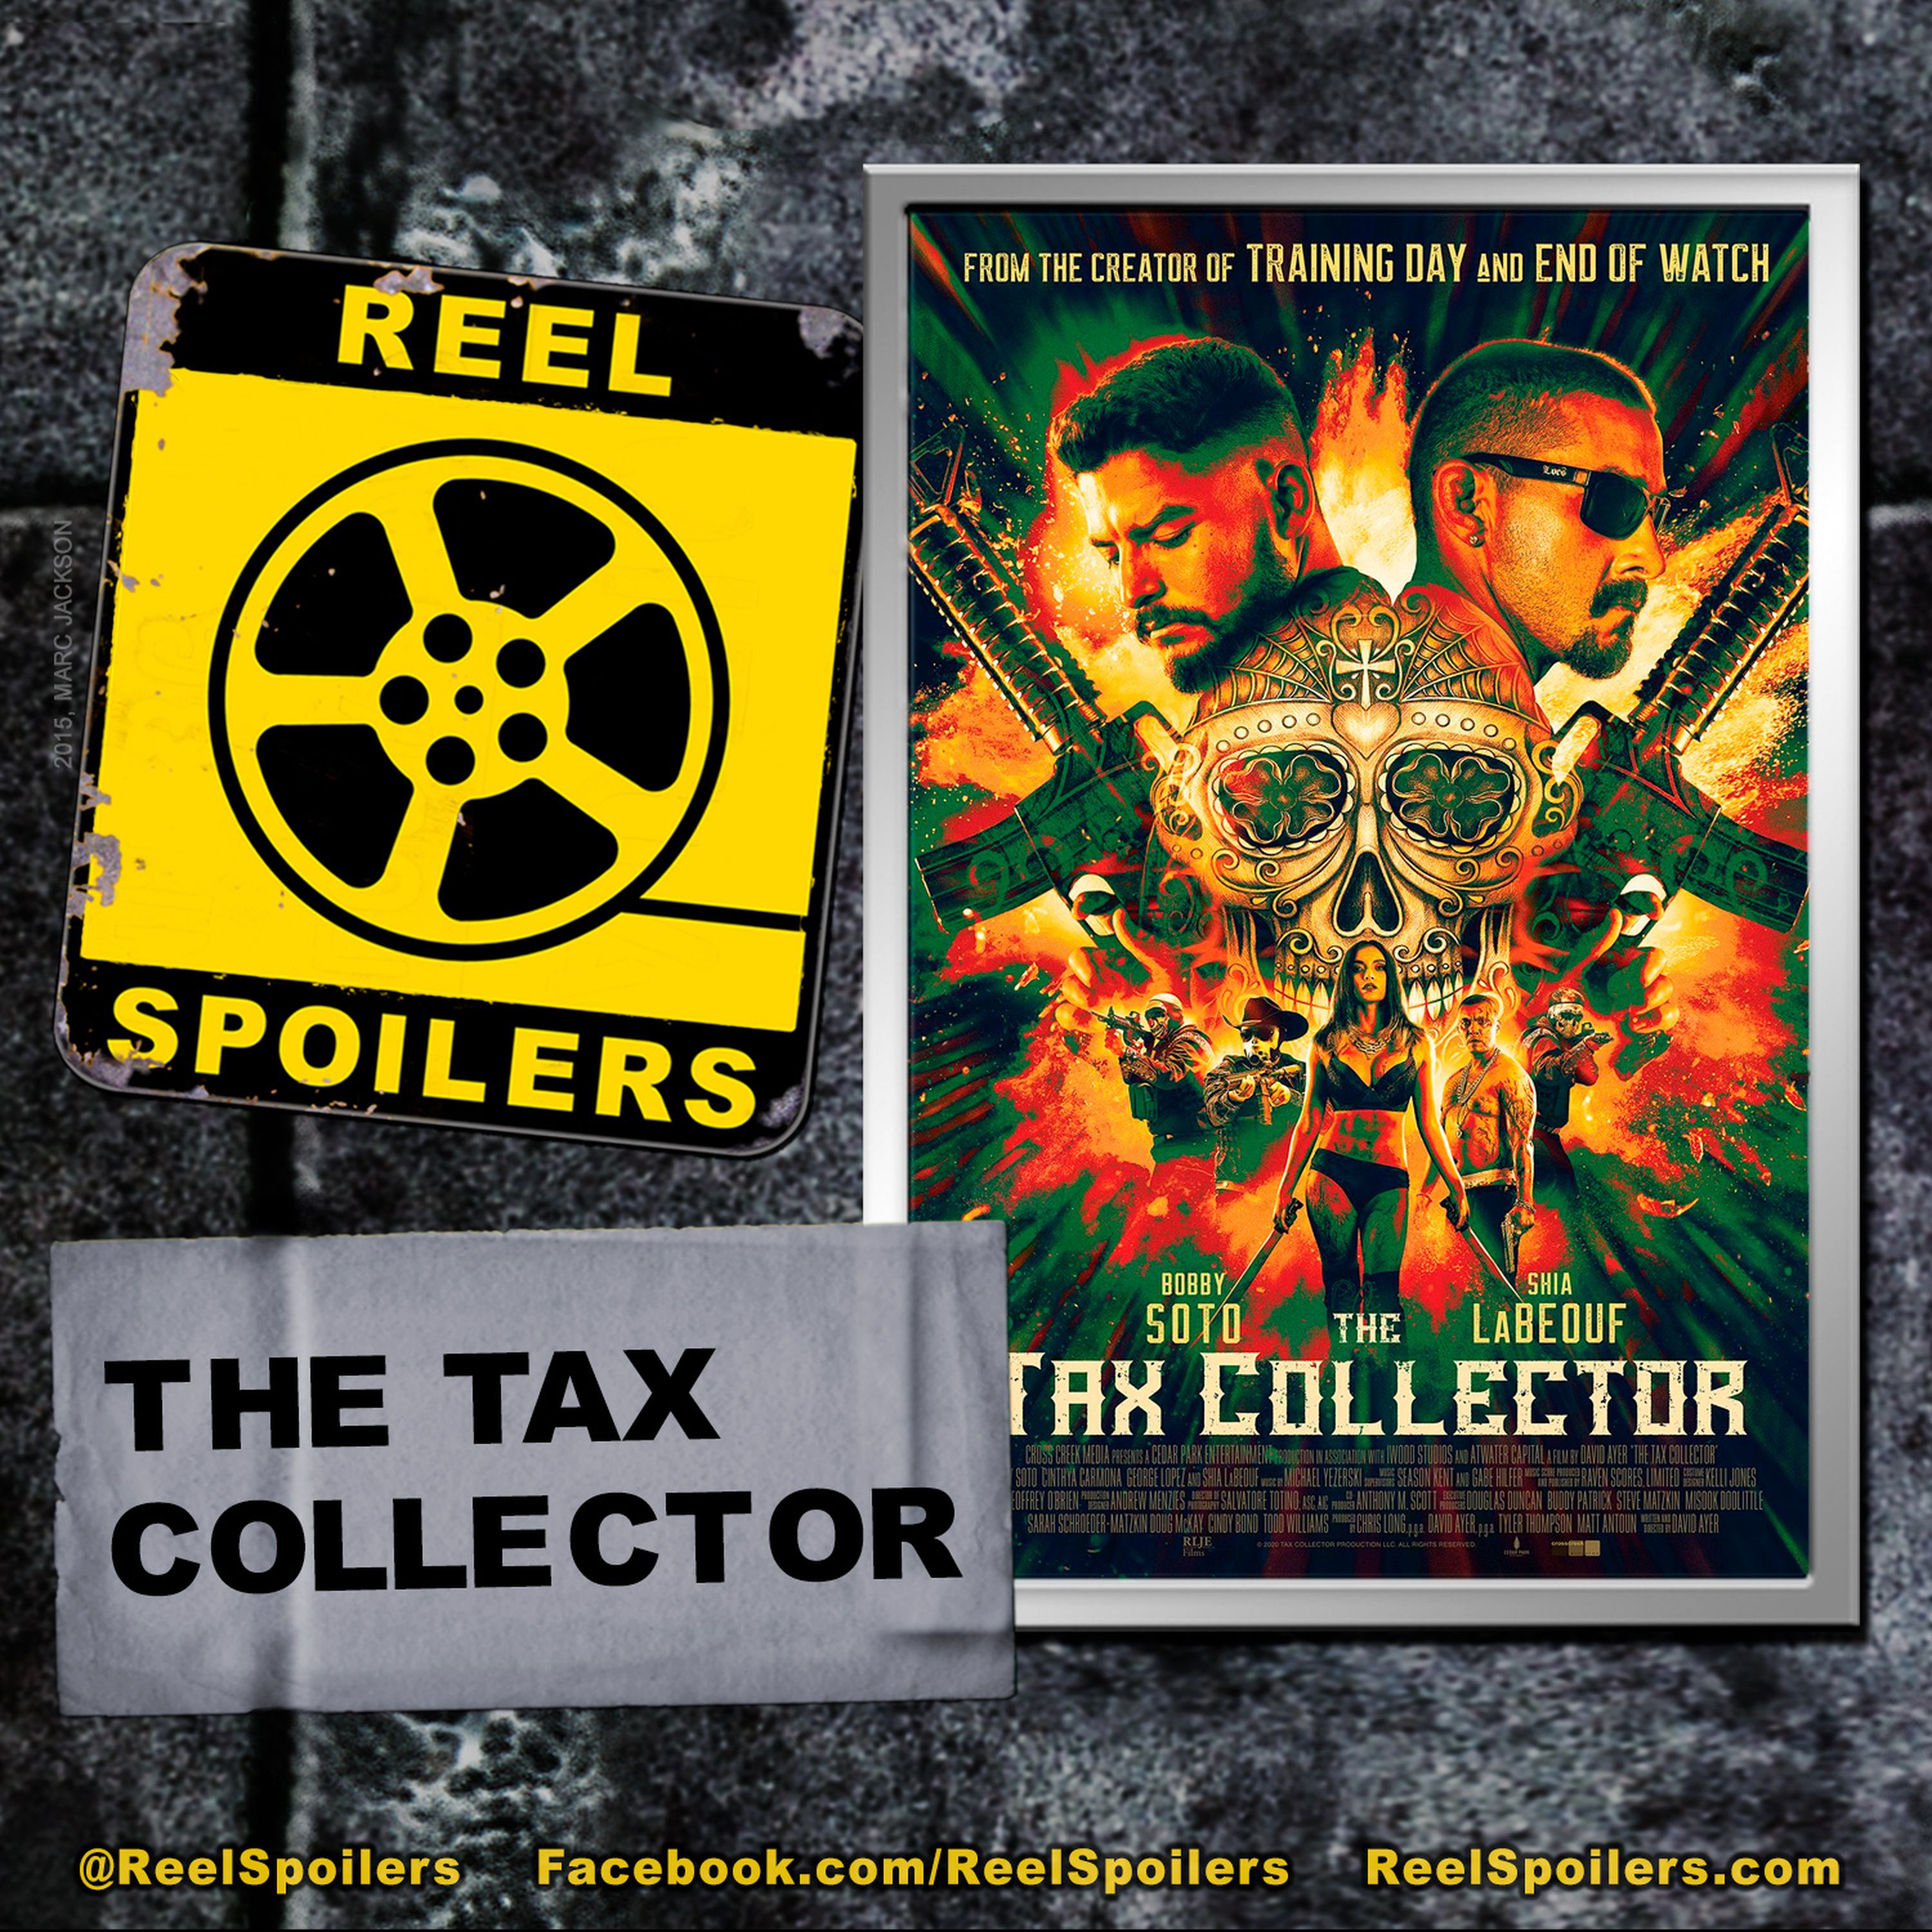 THE TAX COLLECTOR Starring Bobby Soto, Shia LaBeouf Image